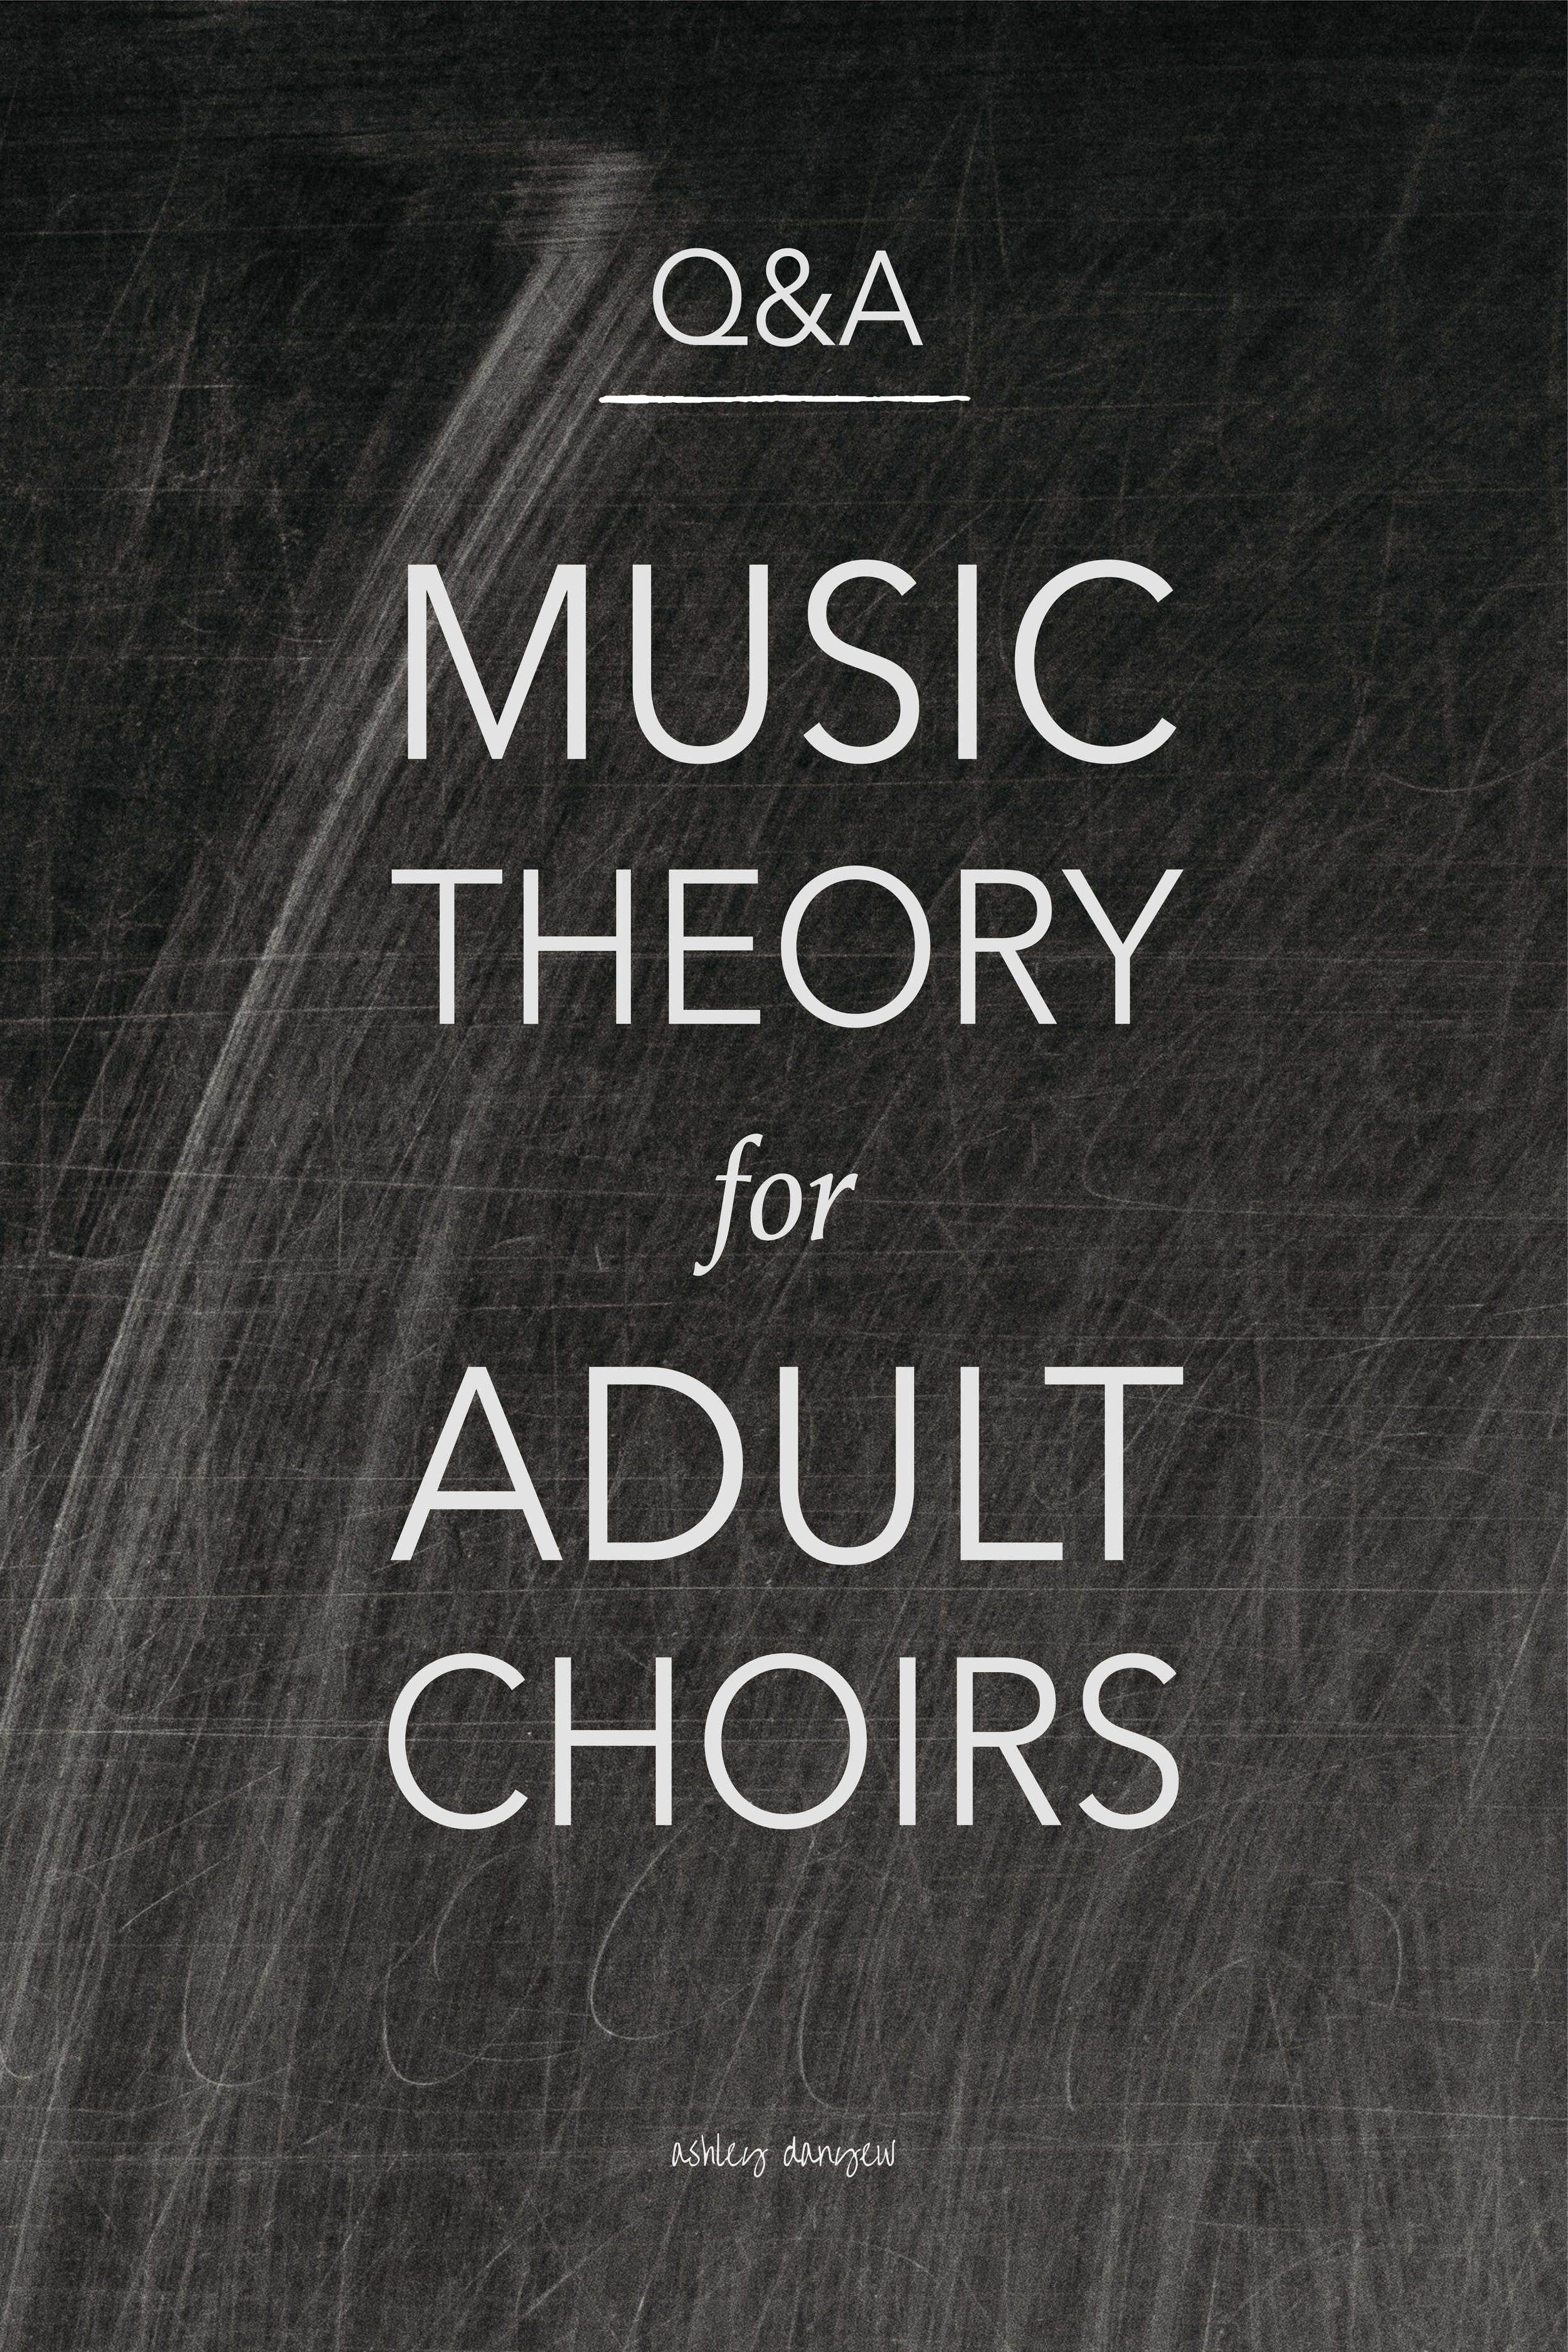 Music Theory Resources for Adult Choirs